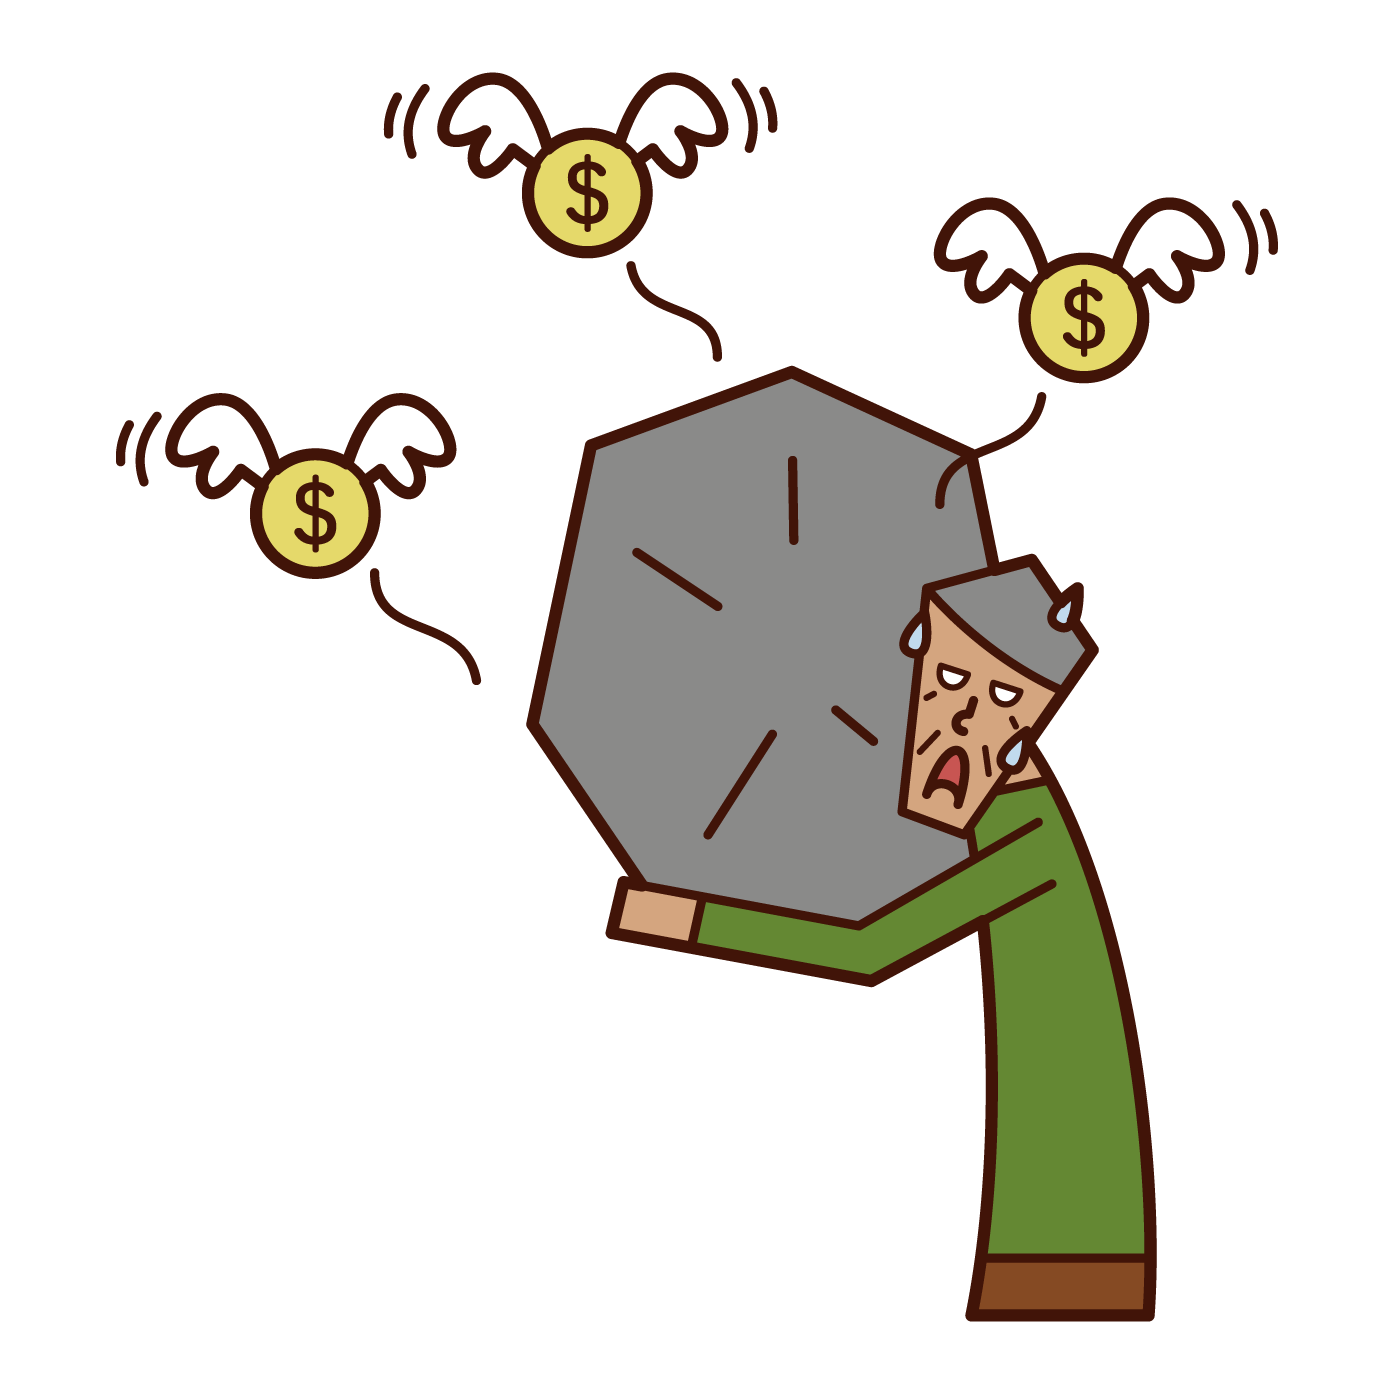 Illustration of a person (grandfather) who is in debt